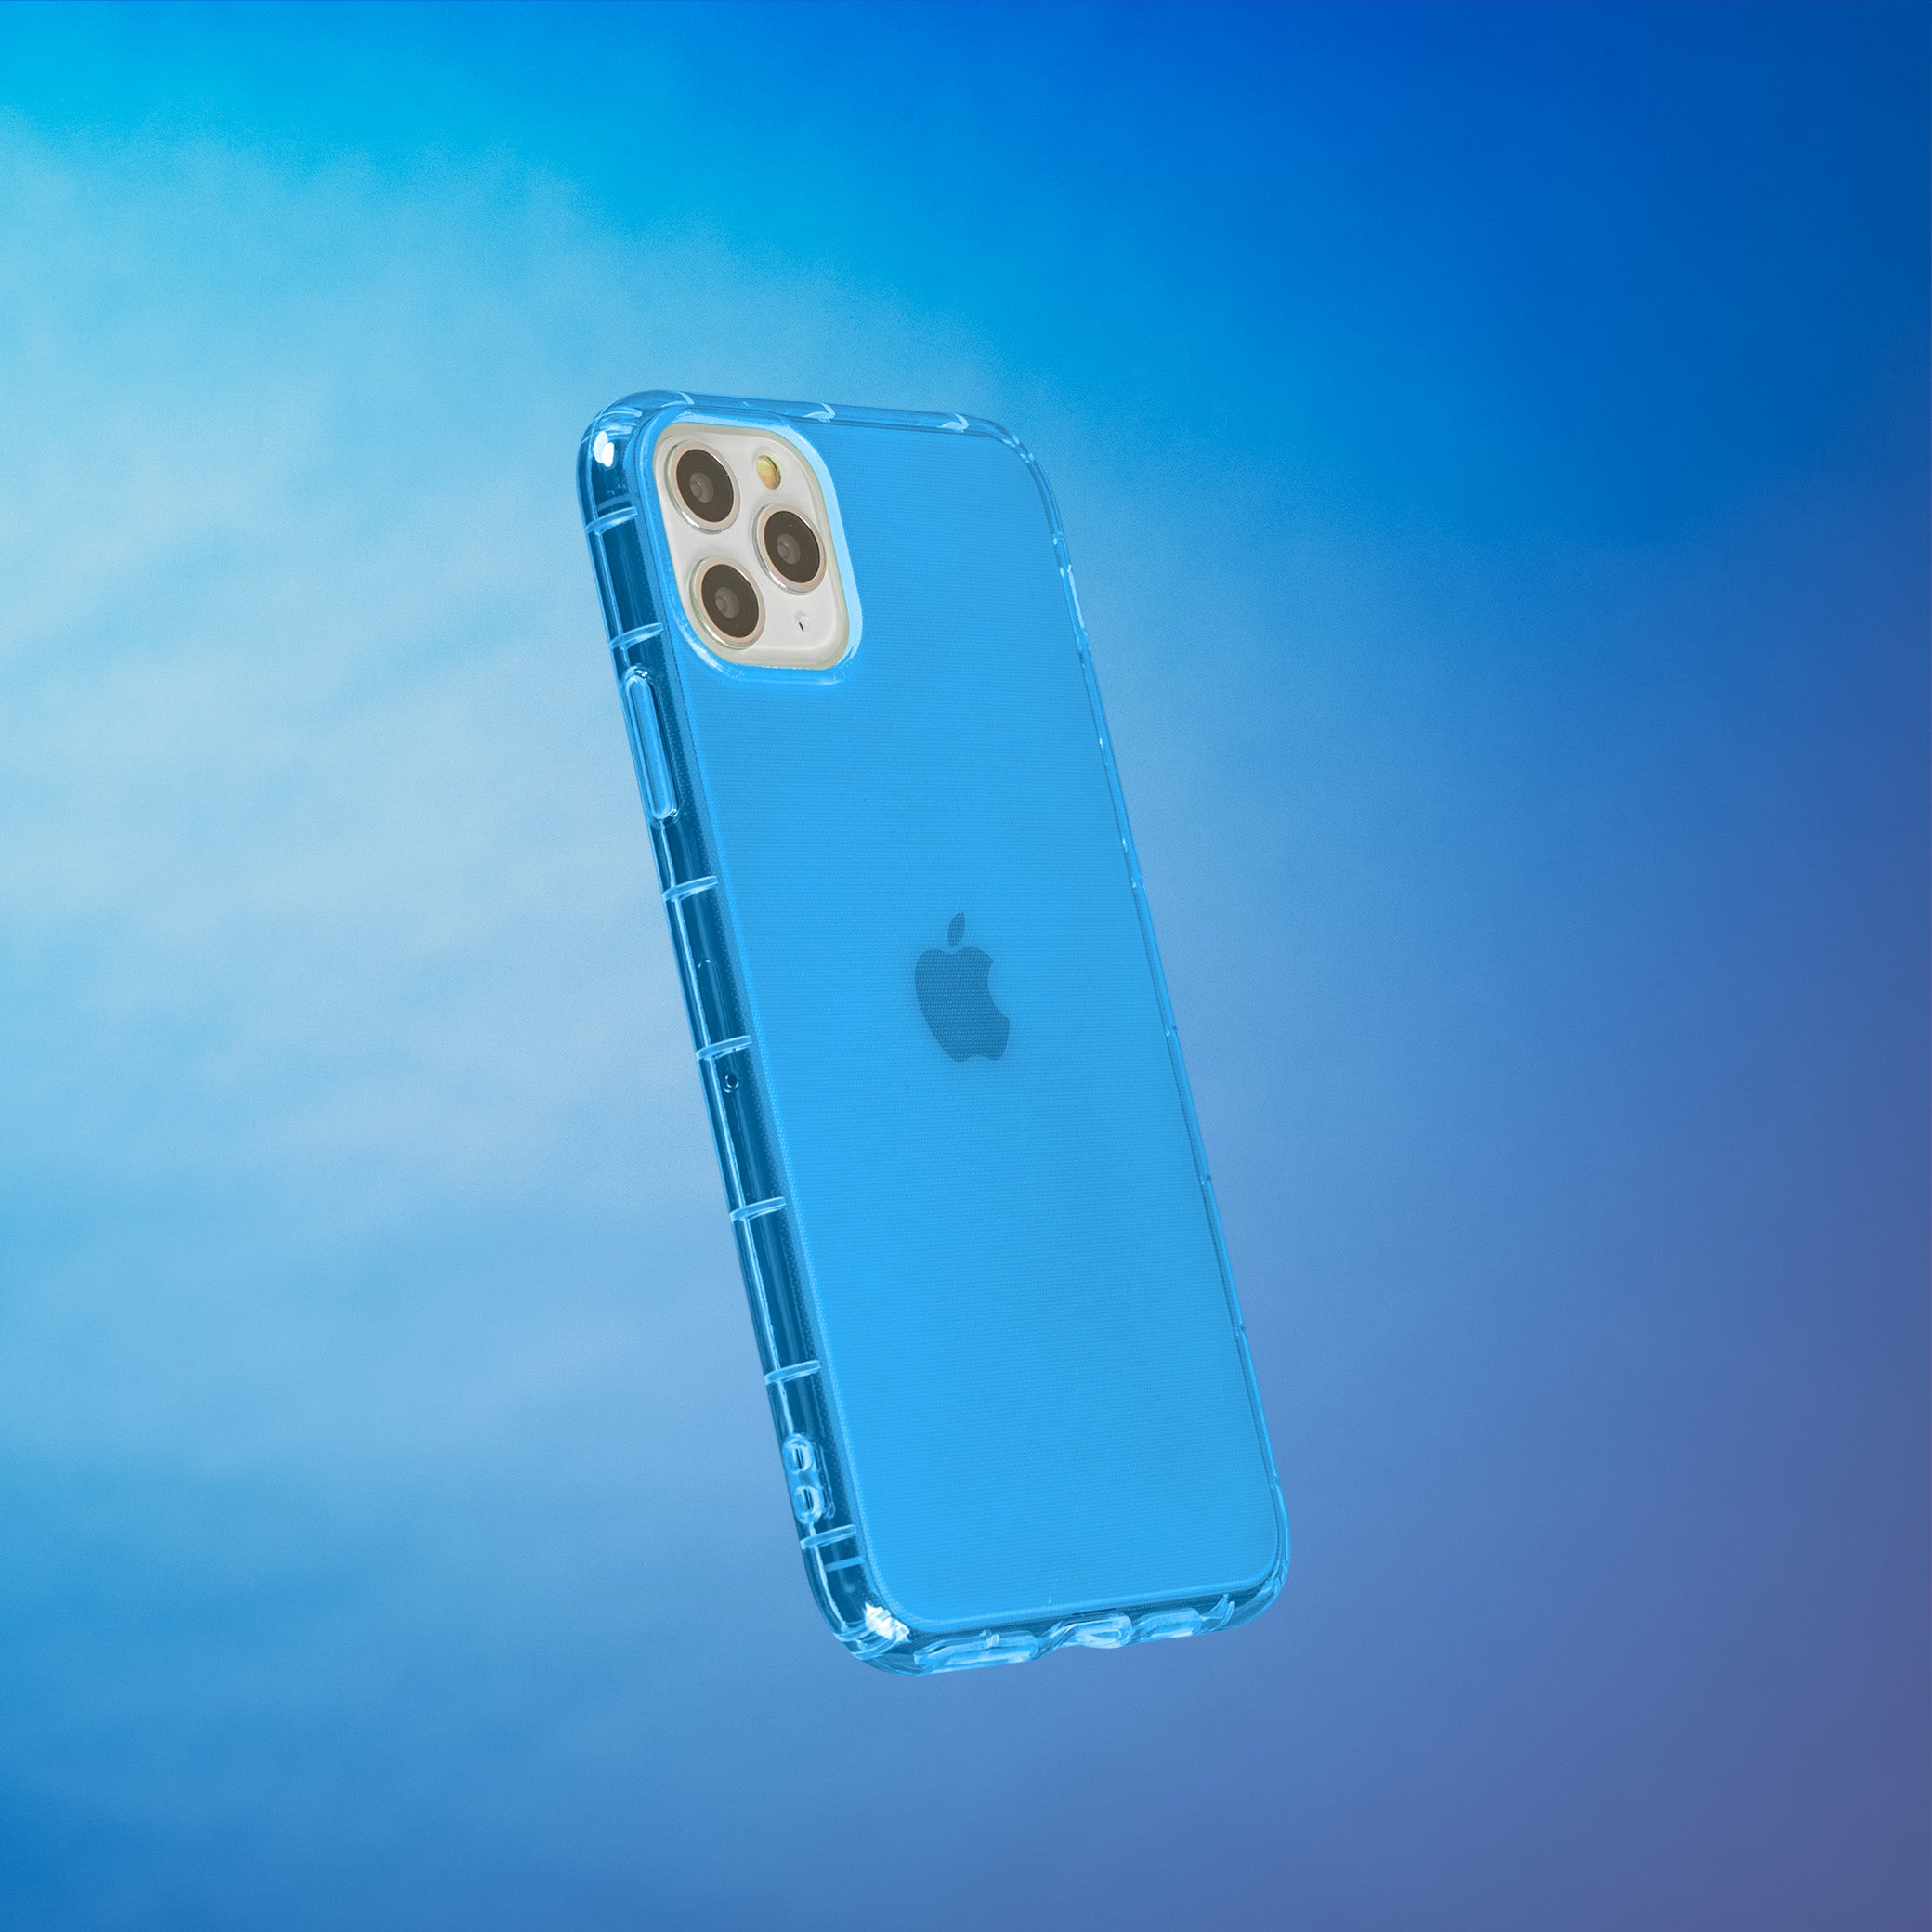 Highlighter Case for iPhone 11 Pro Max - Elevated Azure Blue